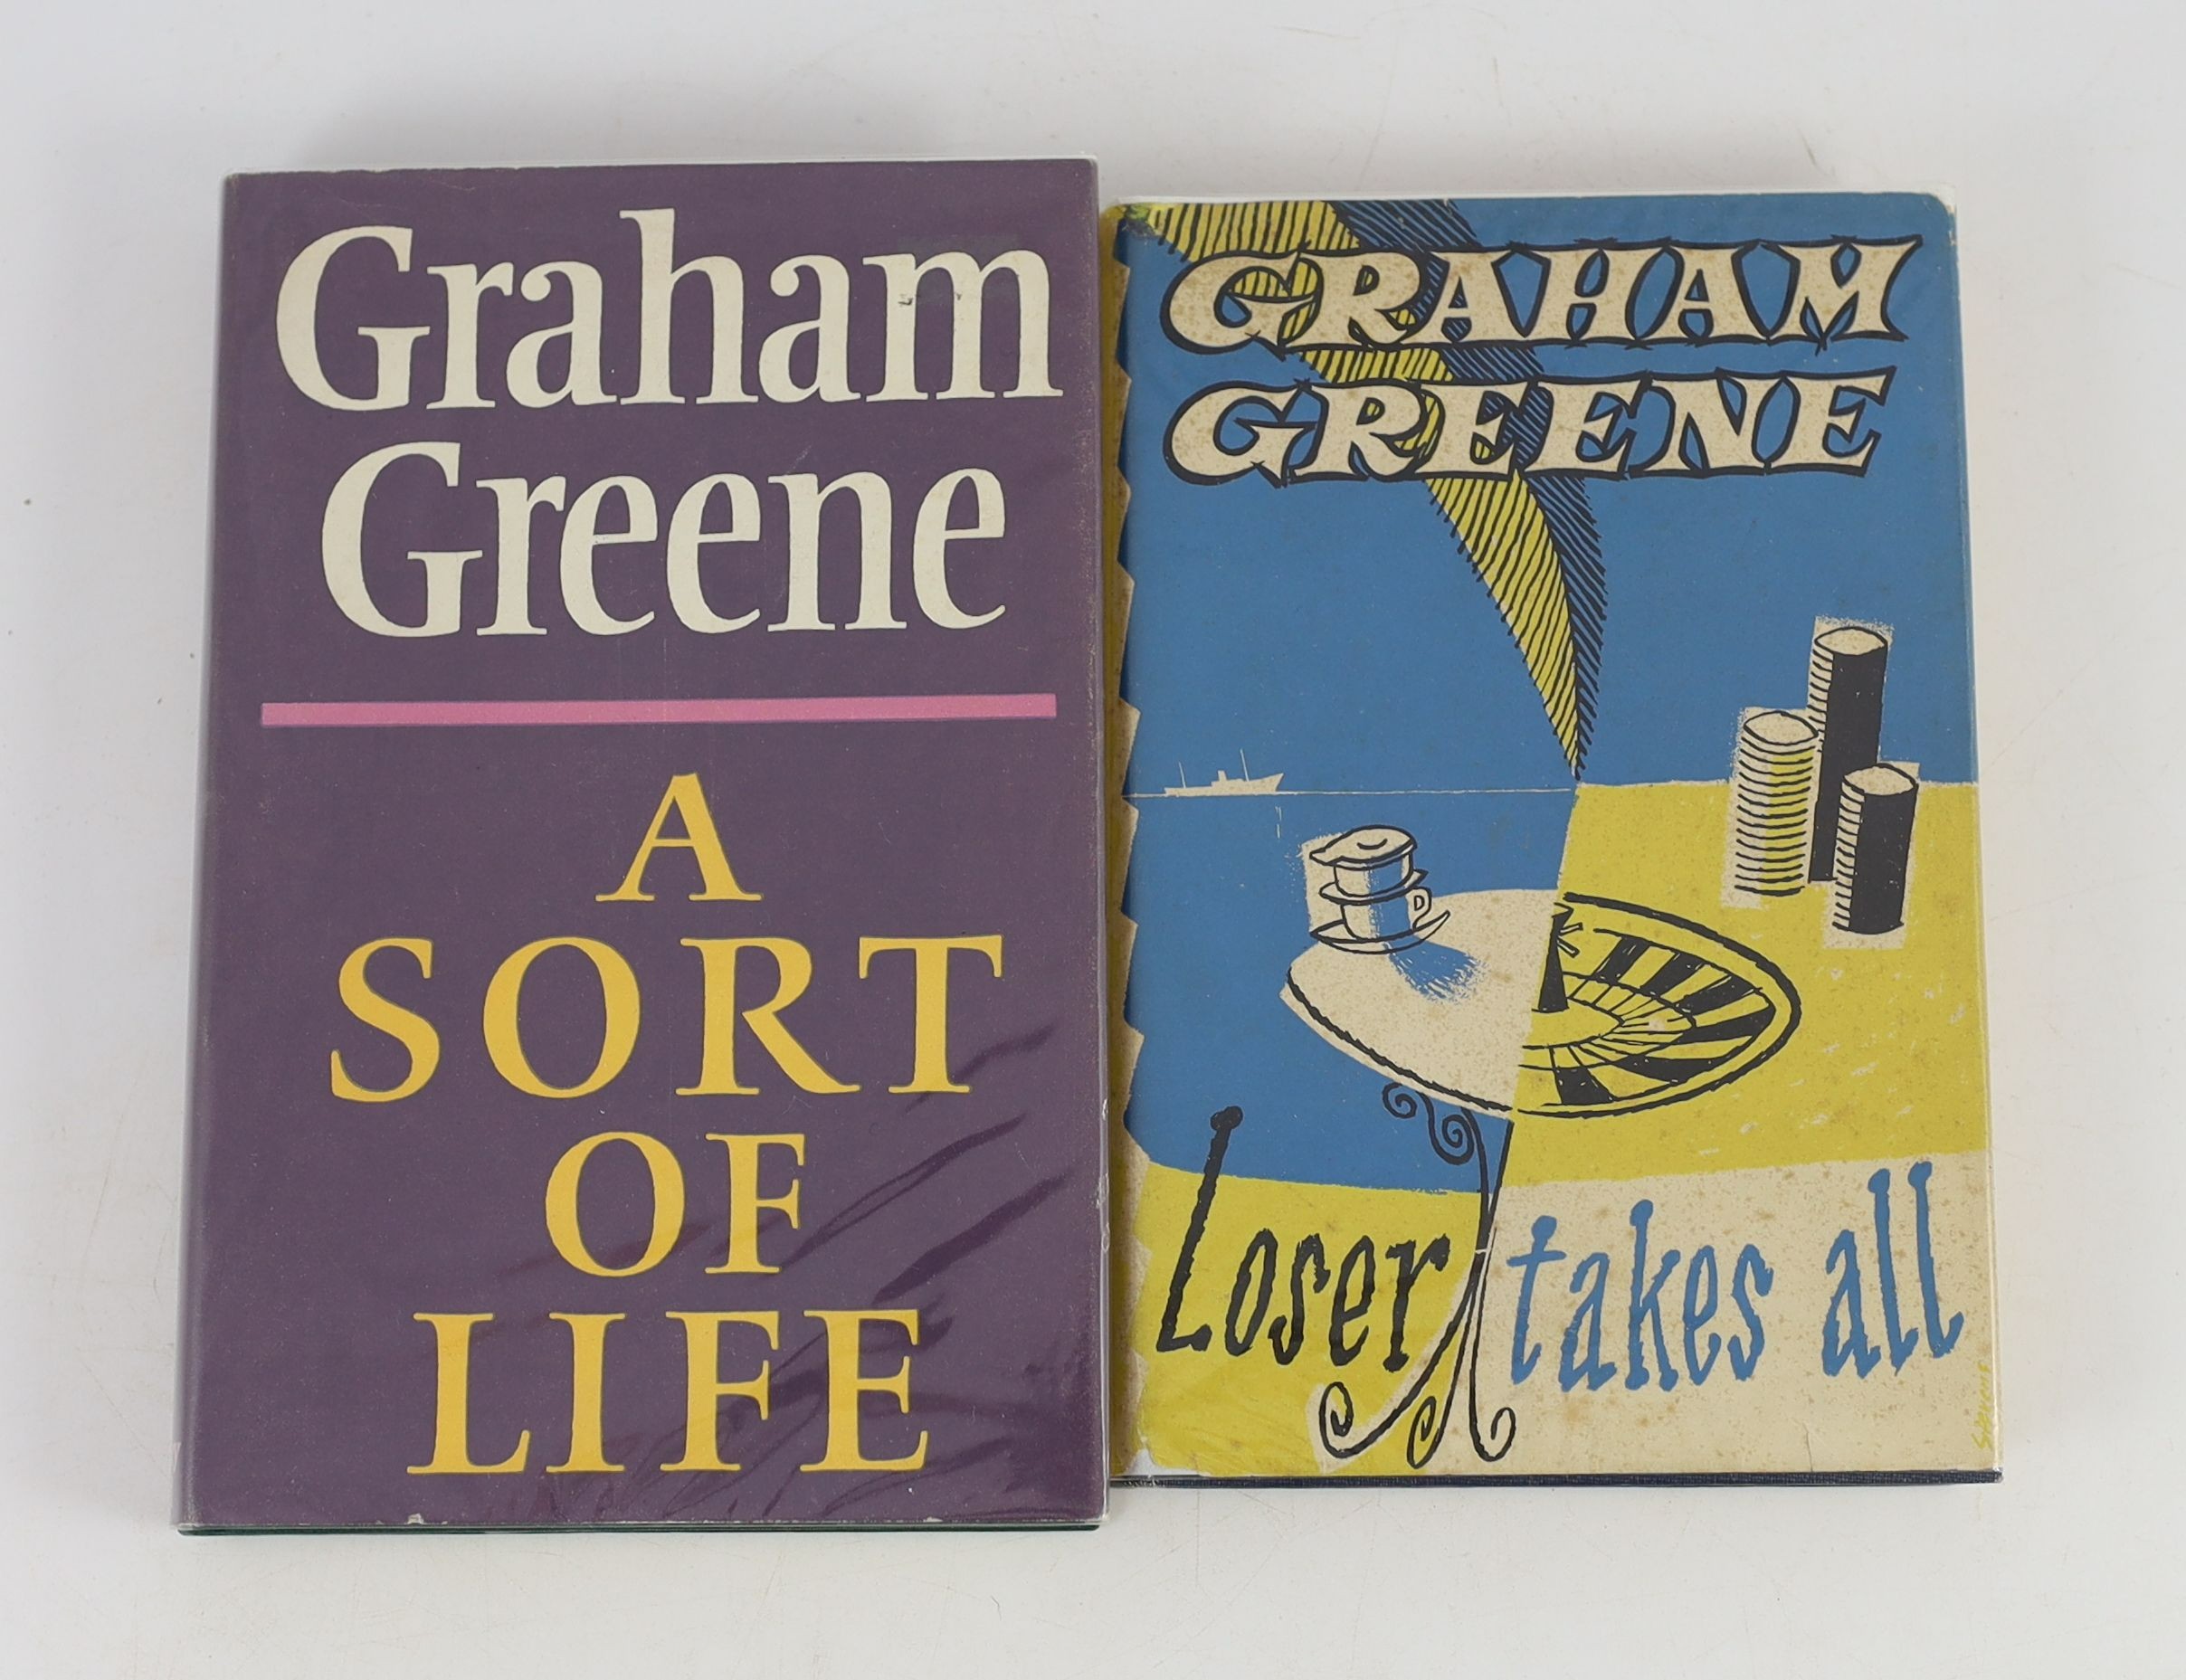 Greene, Graham - 3 works - A Sort of Life. 1st ed. original cloth with clipped d/j. 8vo. The Bodley Head, London, 1971; Travels with my Aunt. 1st ed. original cloth and unclipped d/j. 8vo. The Bodley Head, London, 1969;